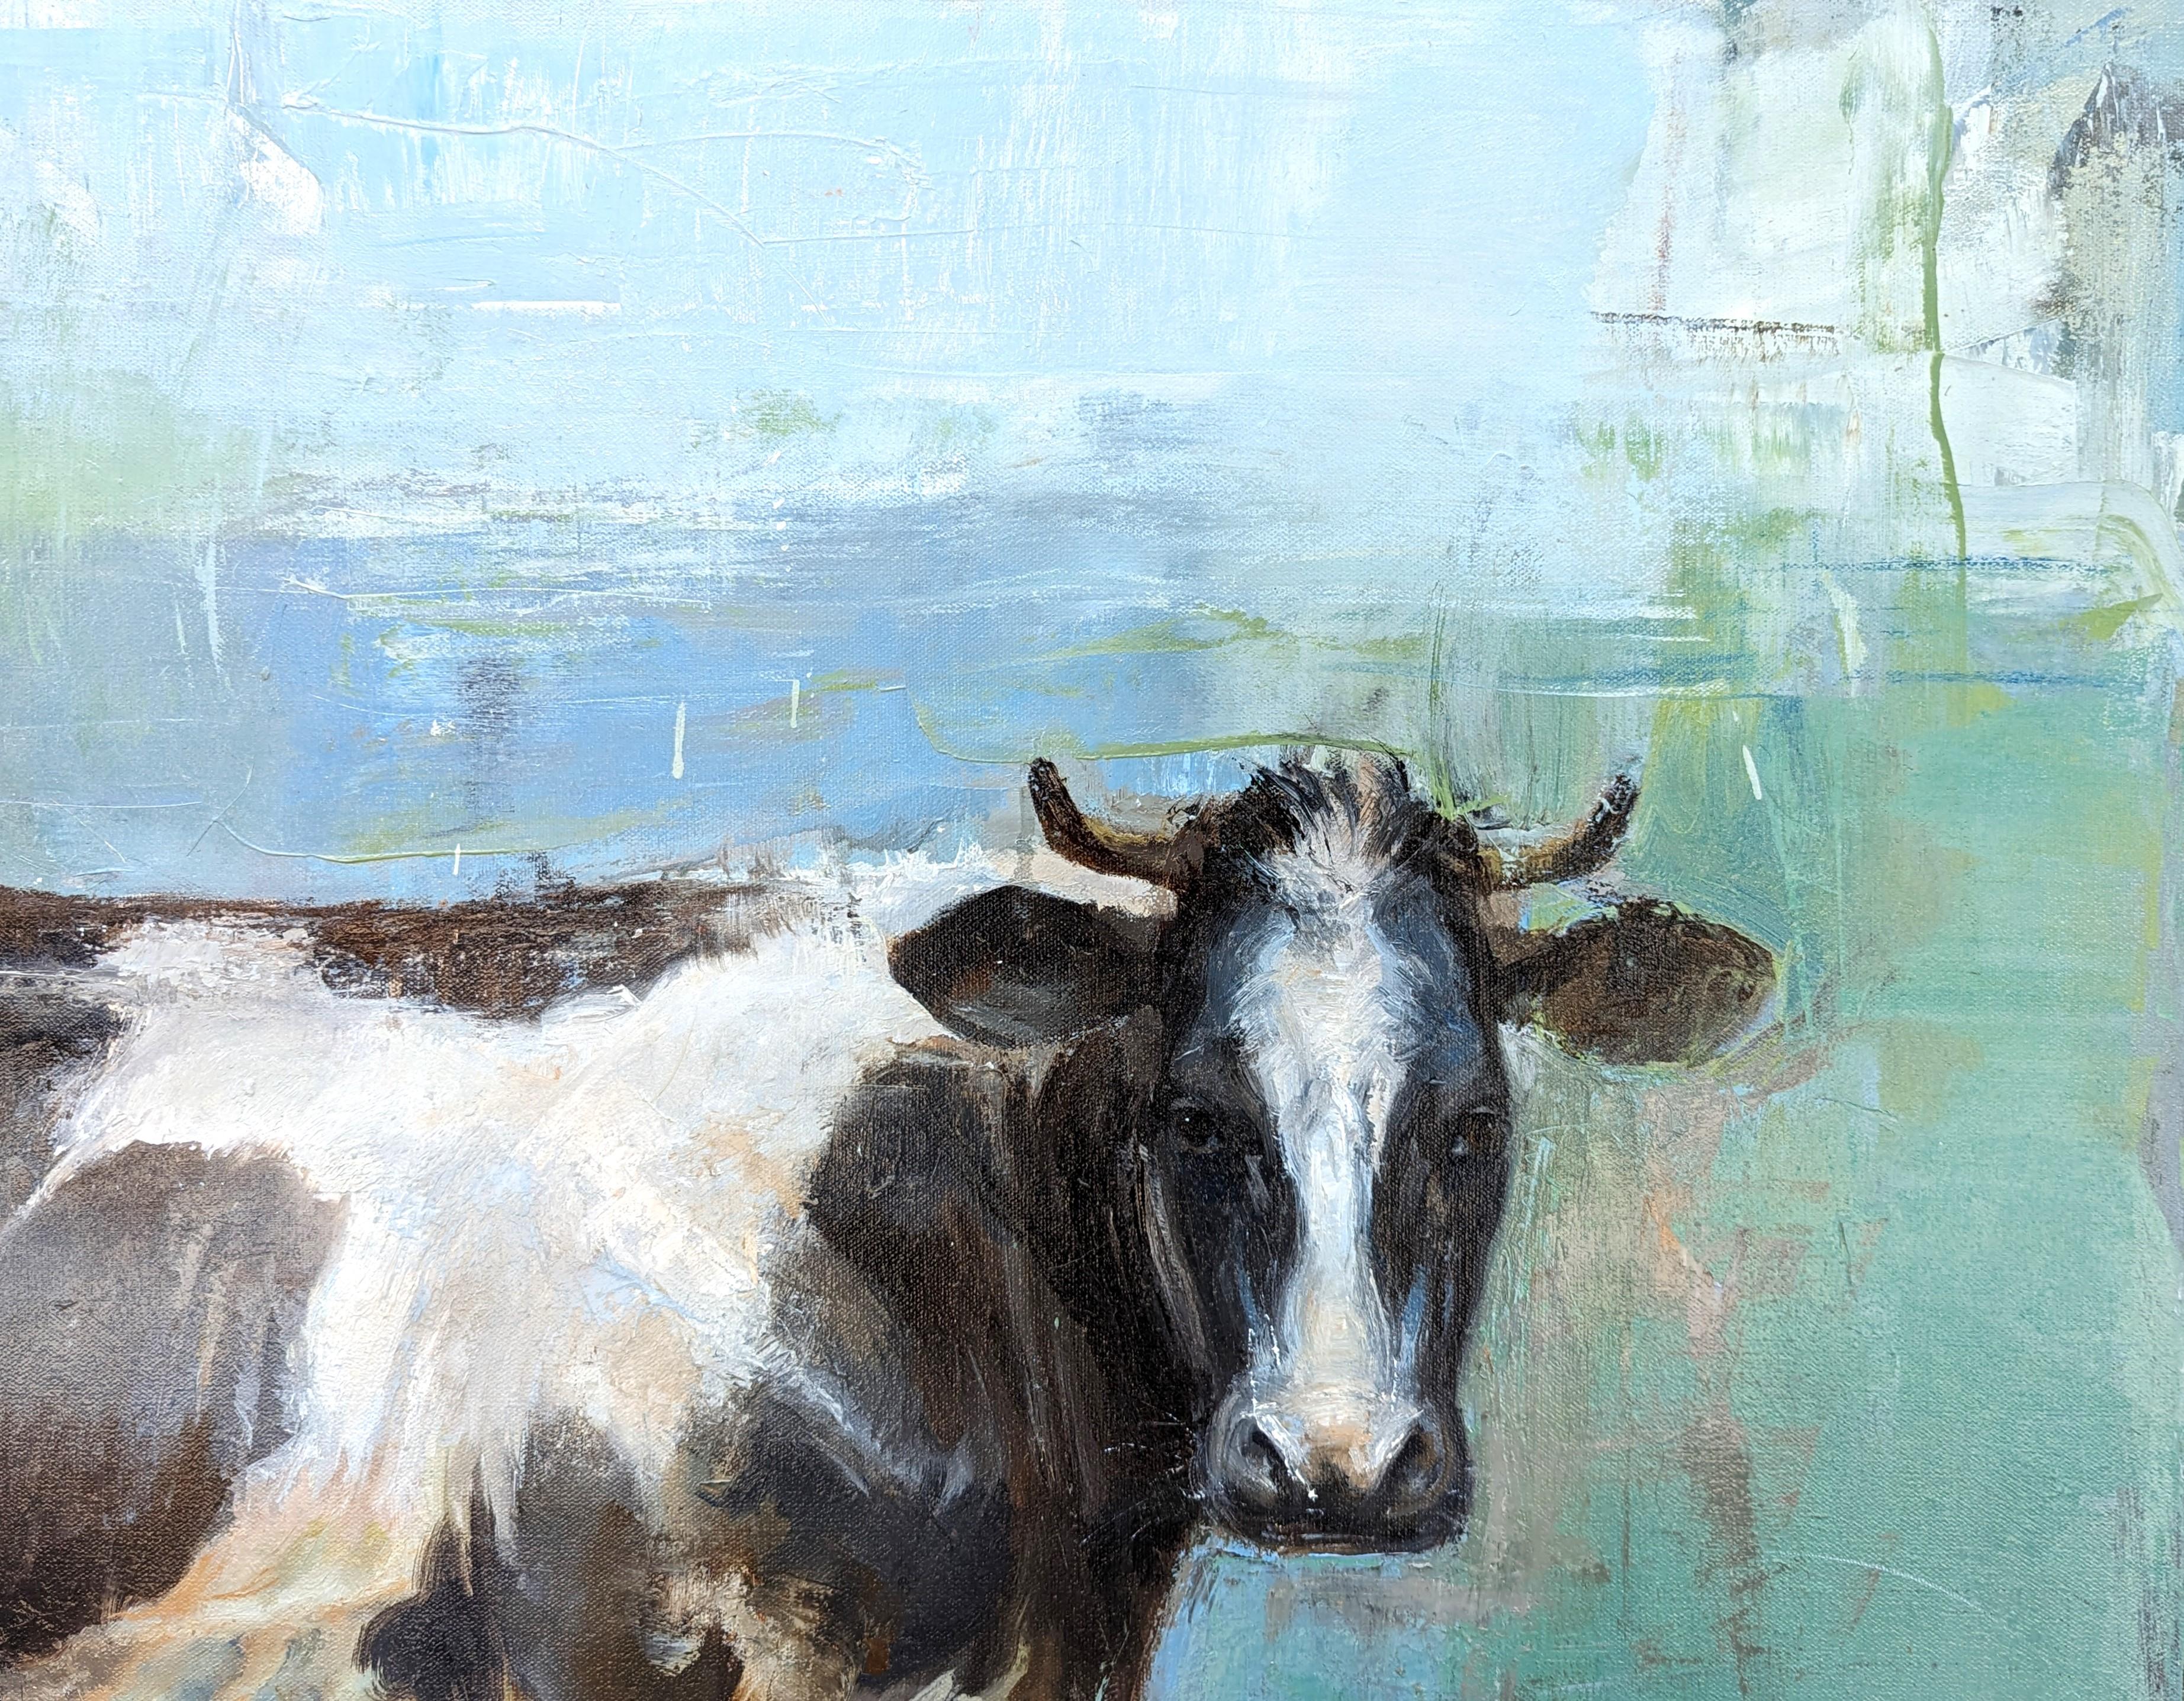 Naturalistic animal painting by contemporary artist Matthew Paoletti. The work features a black and white spotted cow standing in an abstract green field and set against a blue sky. Signed and dated by the artist in the front lower right corner.